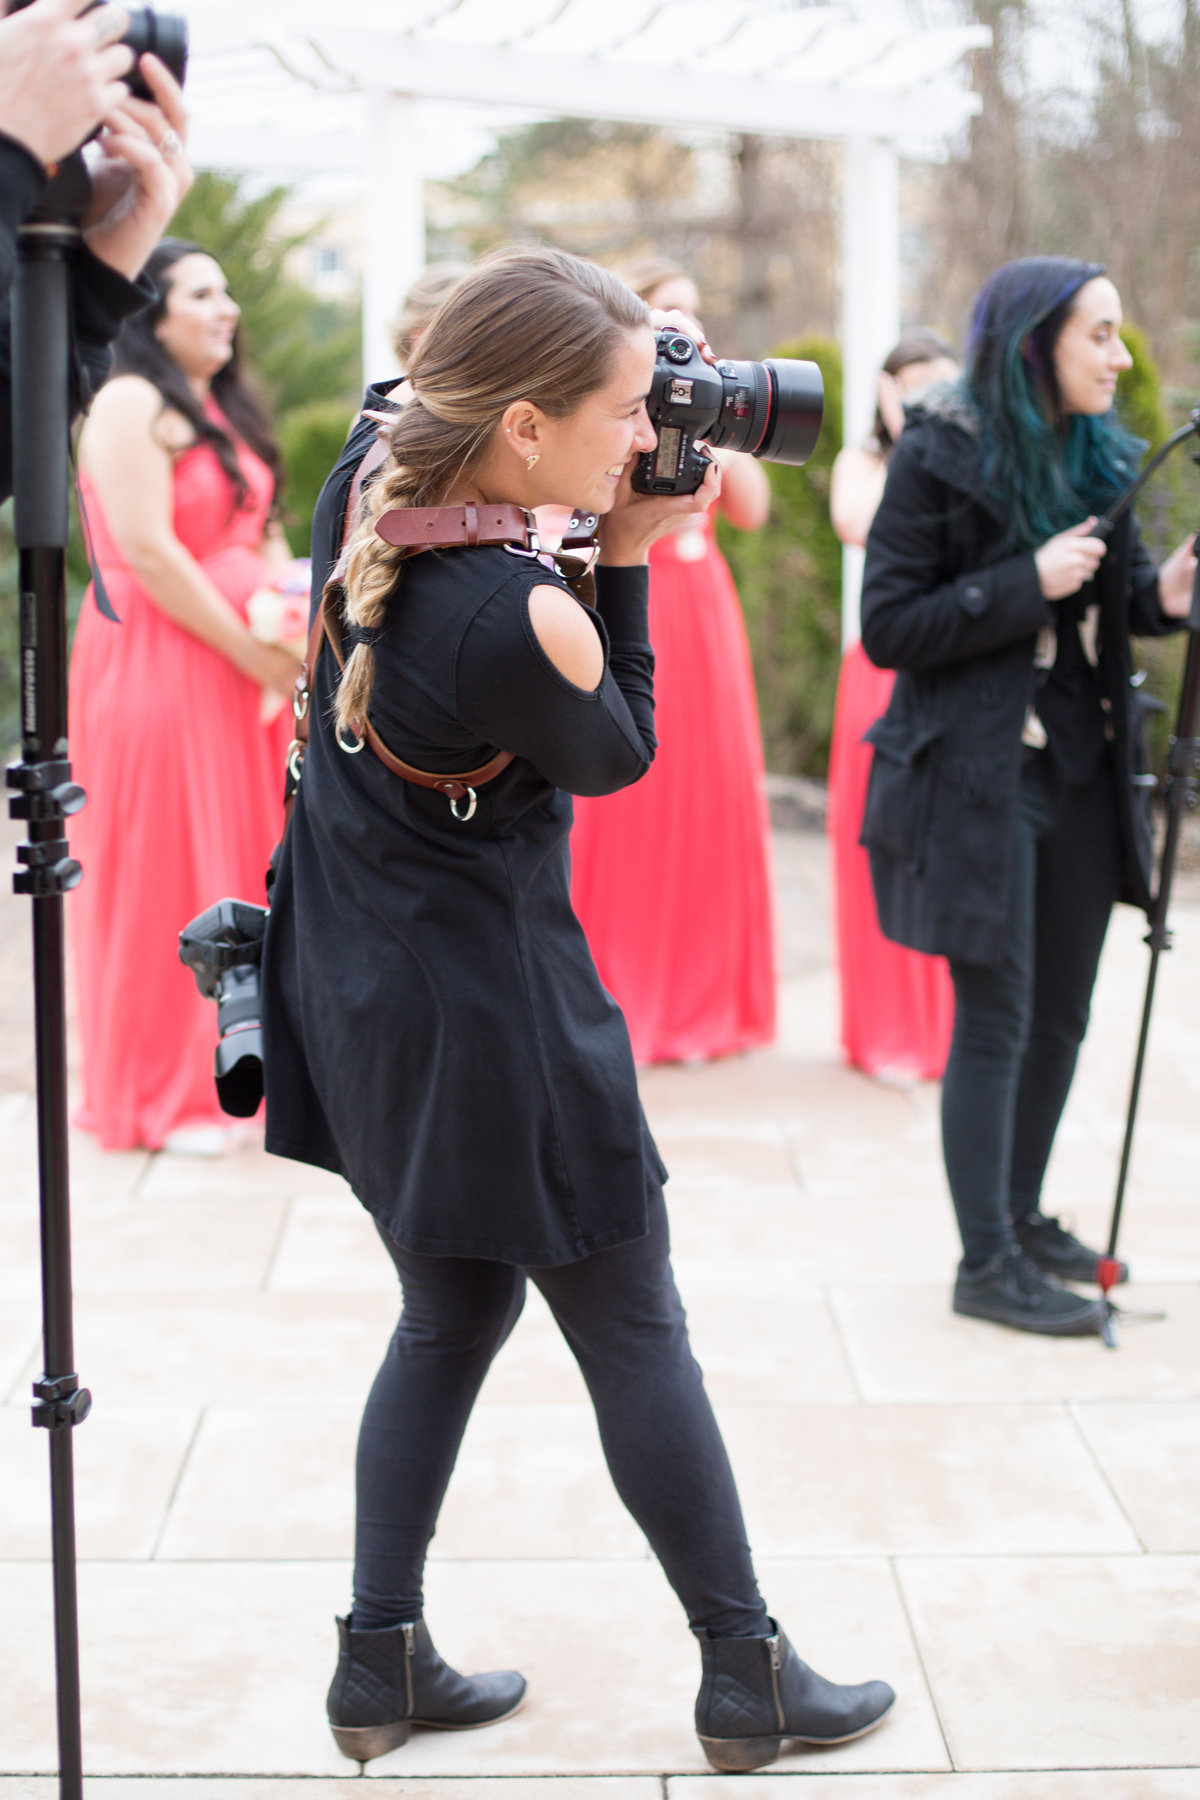 Ashley Mac Photographs - New Jersey Weddings - Behind the Scenes of a Wedding - C24A0101